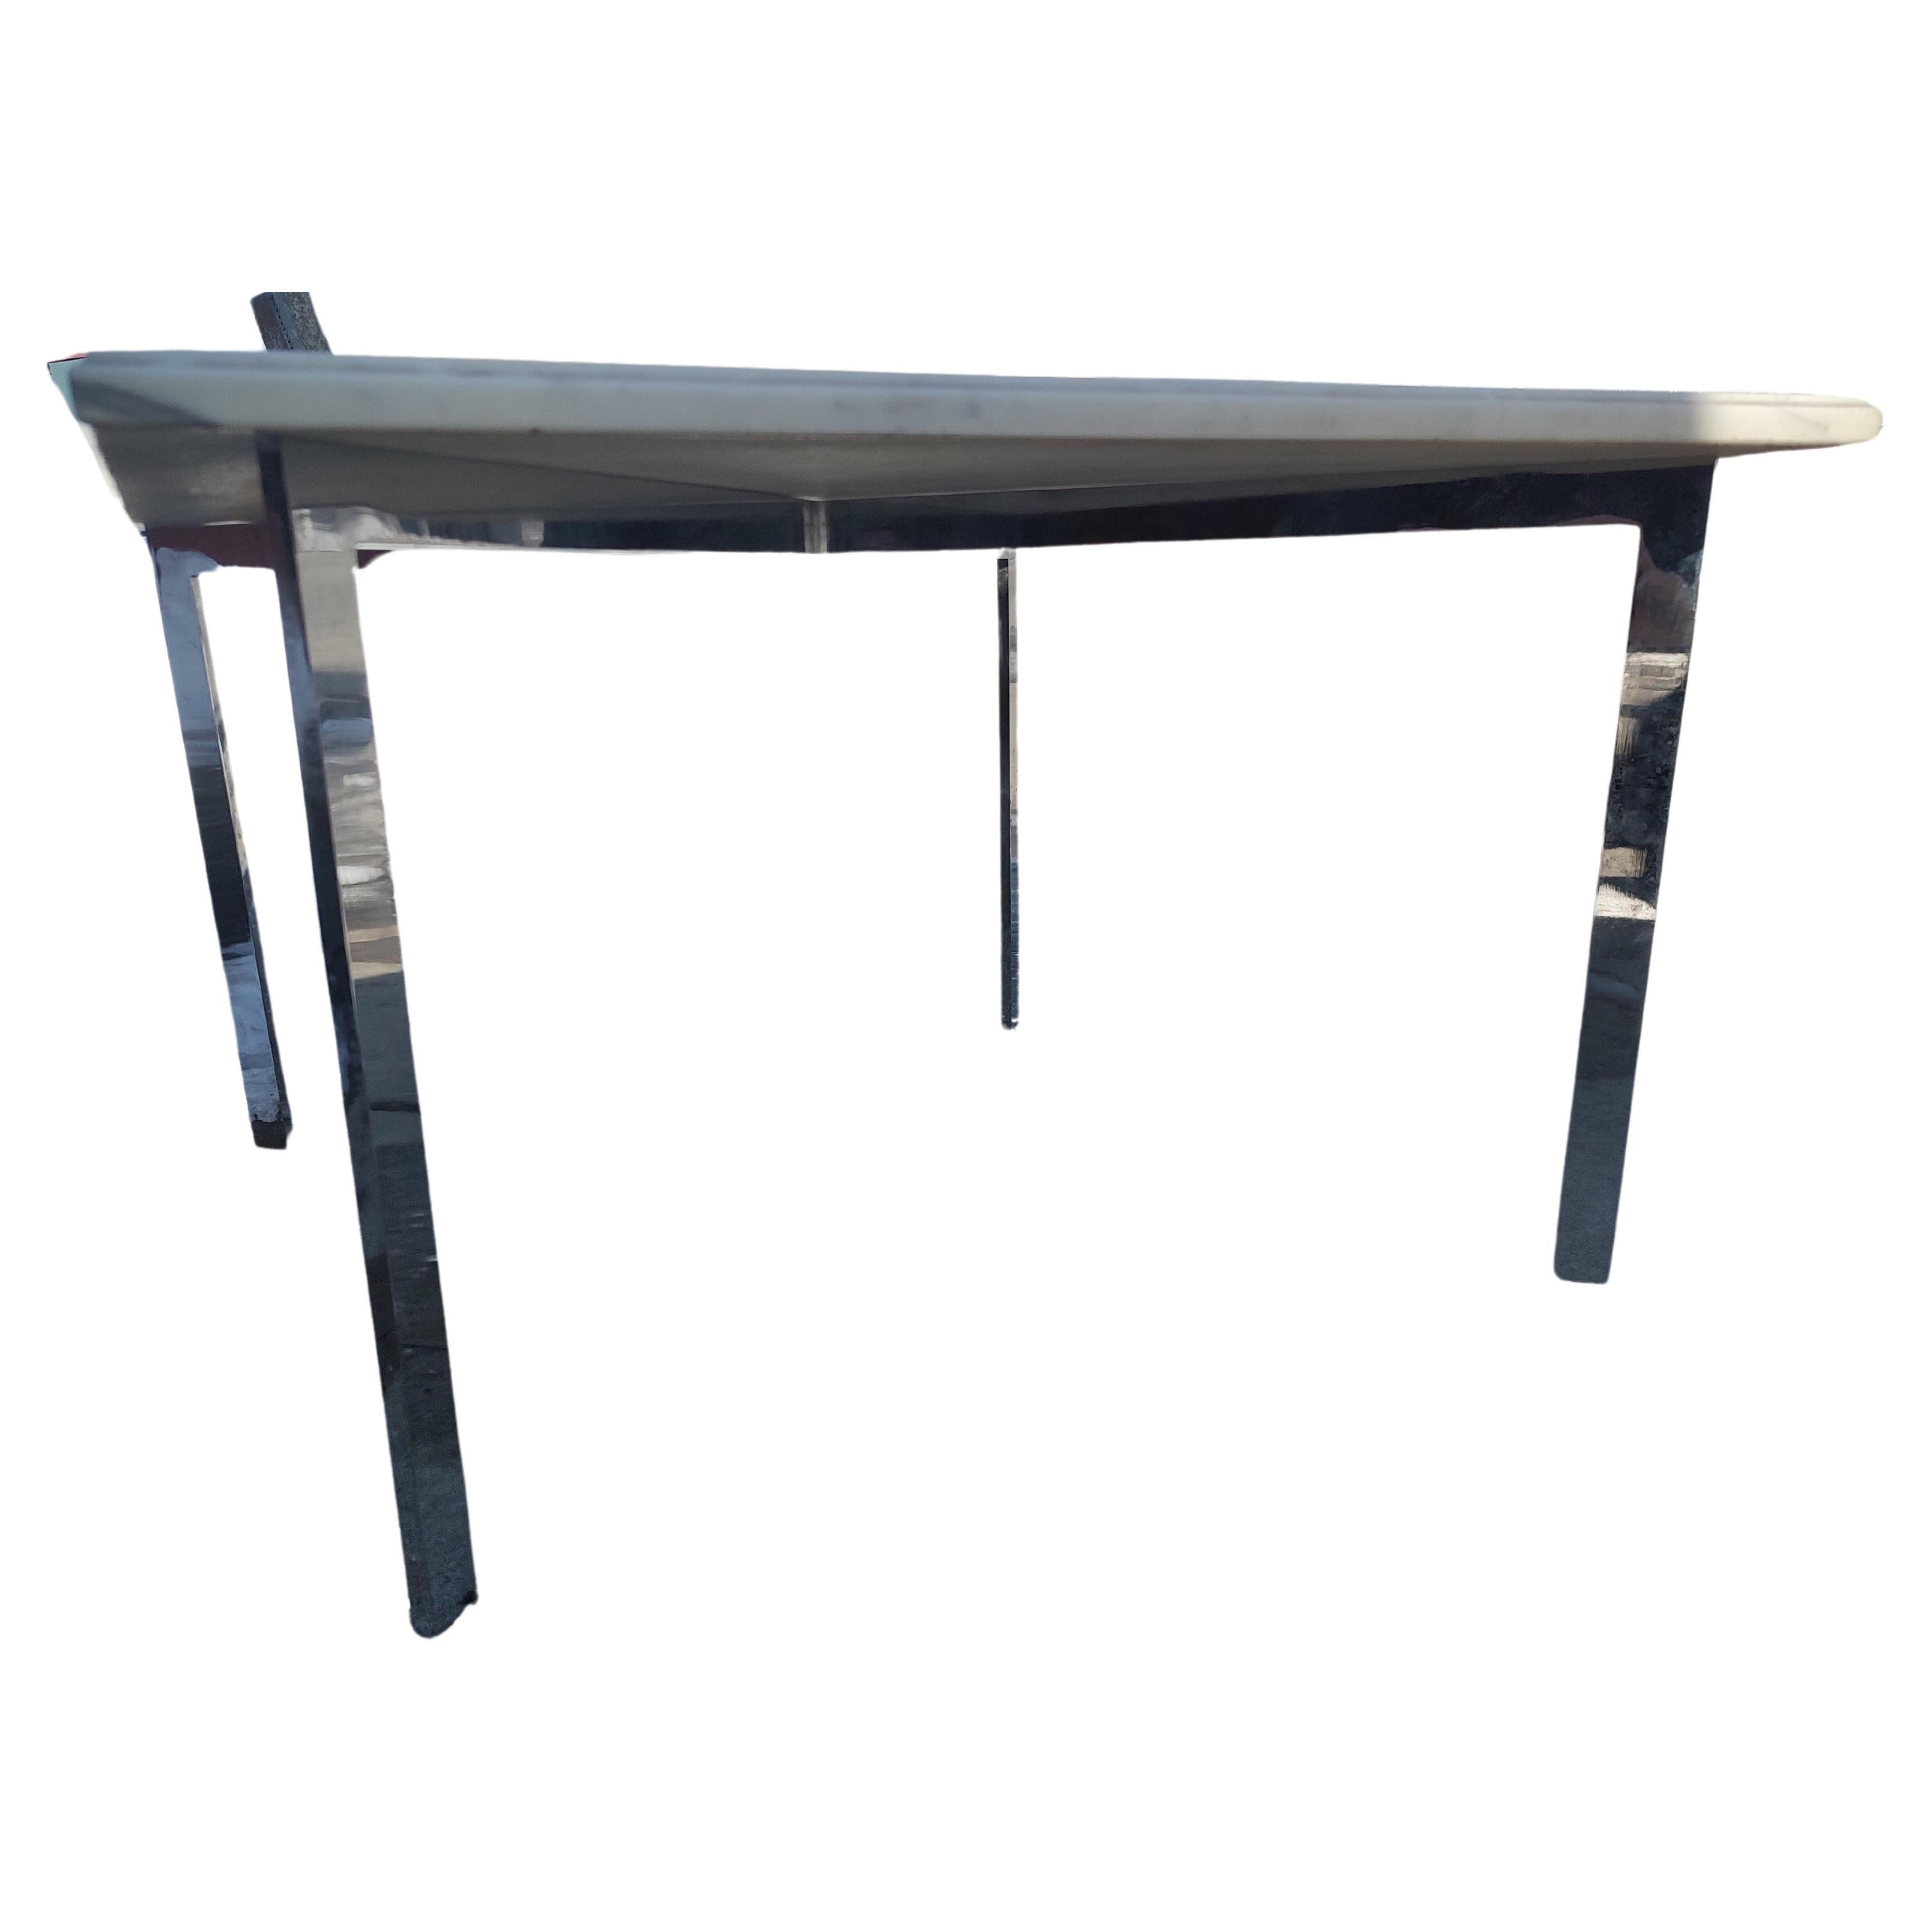 American Mid Century Modern Marble Top Table With Ludwig Mies van der Rohe X Base C1965 For Sale